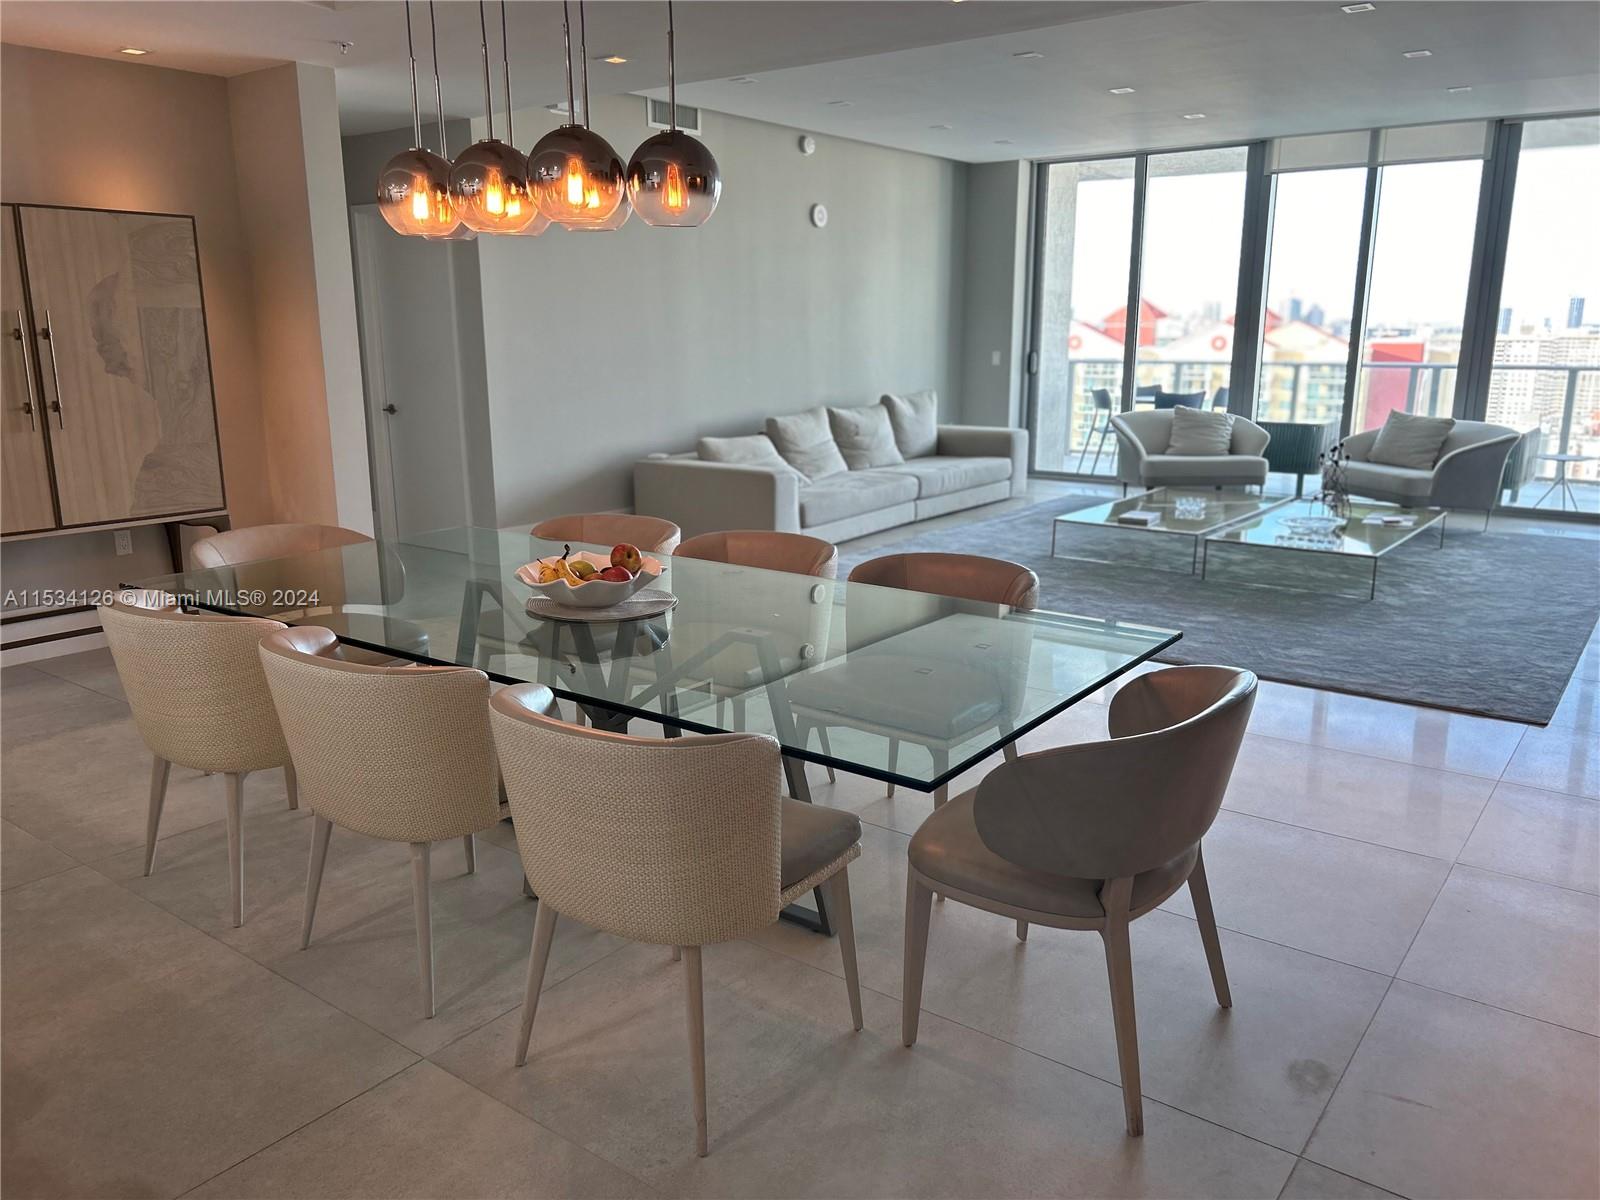 Outstanding Furnished unit in Sunny Isles, close to the beach with 5 stars amenities. Tastefully furnished by Artefacto, this amazing unit at Parque Towers offers 4 bedrooms and 5.5 bathrooms, large family room and expansive terrace with amazing views of the ocean, bay and Sunny Isles skyline. Features include large open floor plan, porcelain tile flooring throughout, floor to ceiling impact glass windows & doors, gourmet kitchen with quartz countertops, induction stove, Italian cabinetries, Wolf appliances, automated blinds and Ornare closets. Luxury amenities include: 24/7 front desk/valet, 4 pools, Movie Theater, Spa, Gym, kids club & playground, games room, social room & Beach Club. Near the beach, Aventura Mall & Bal Harbor Shops. Awesome Schools. Enjoy the ultimate living experience.